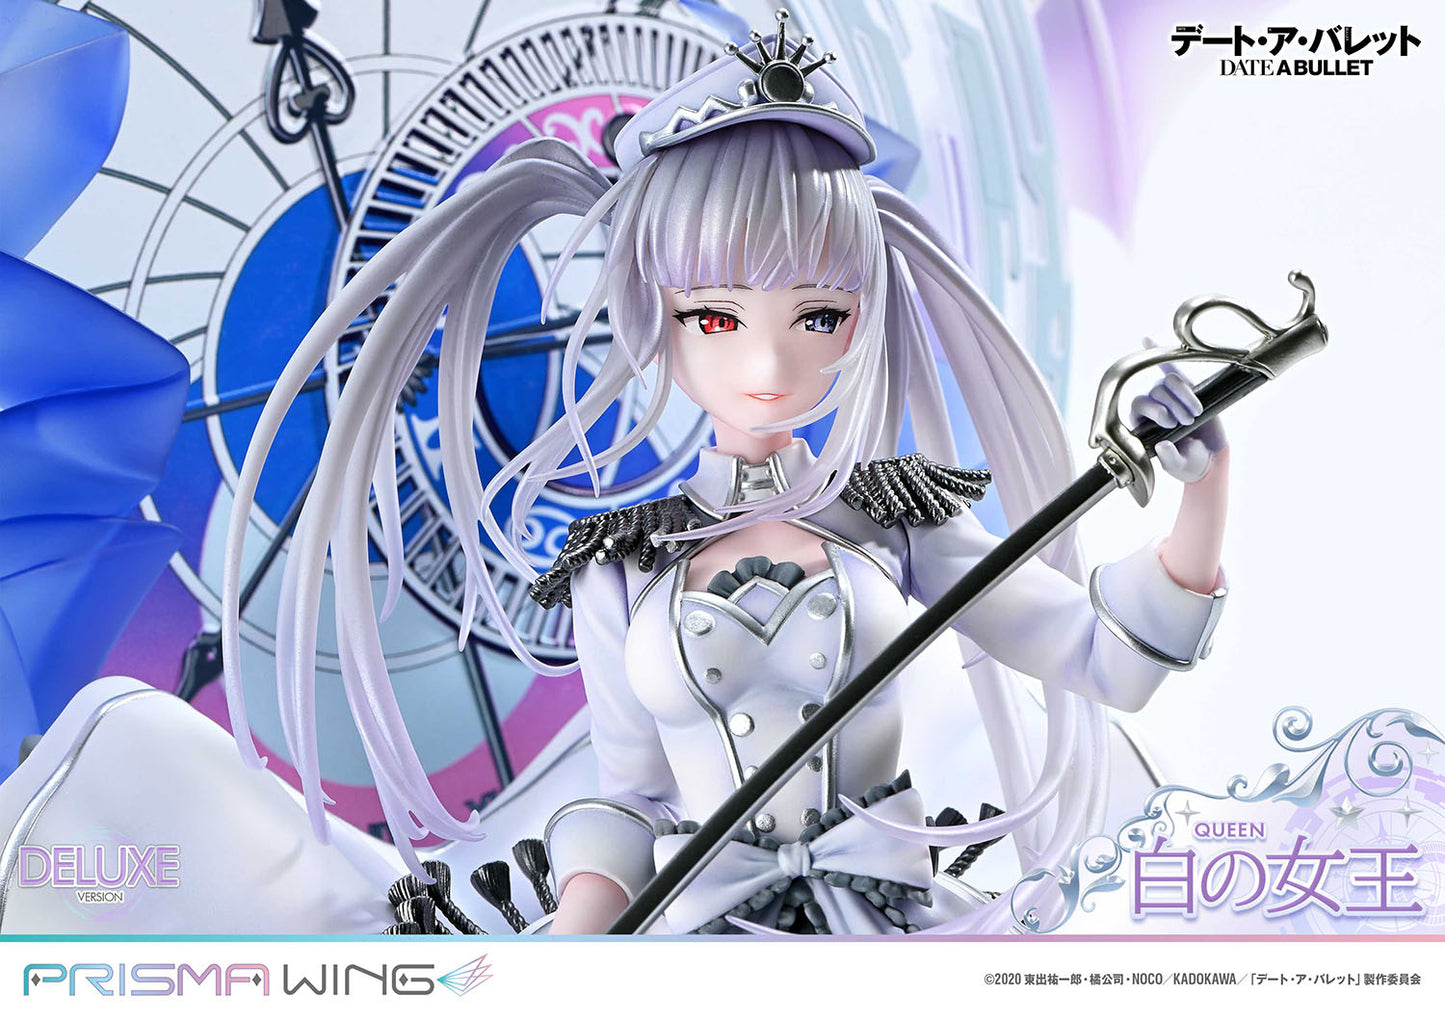 PRISMA WING "Date A Bullet" White Queen DX Edition 1/7 Scale Figure